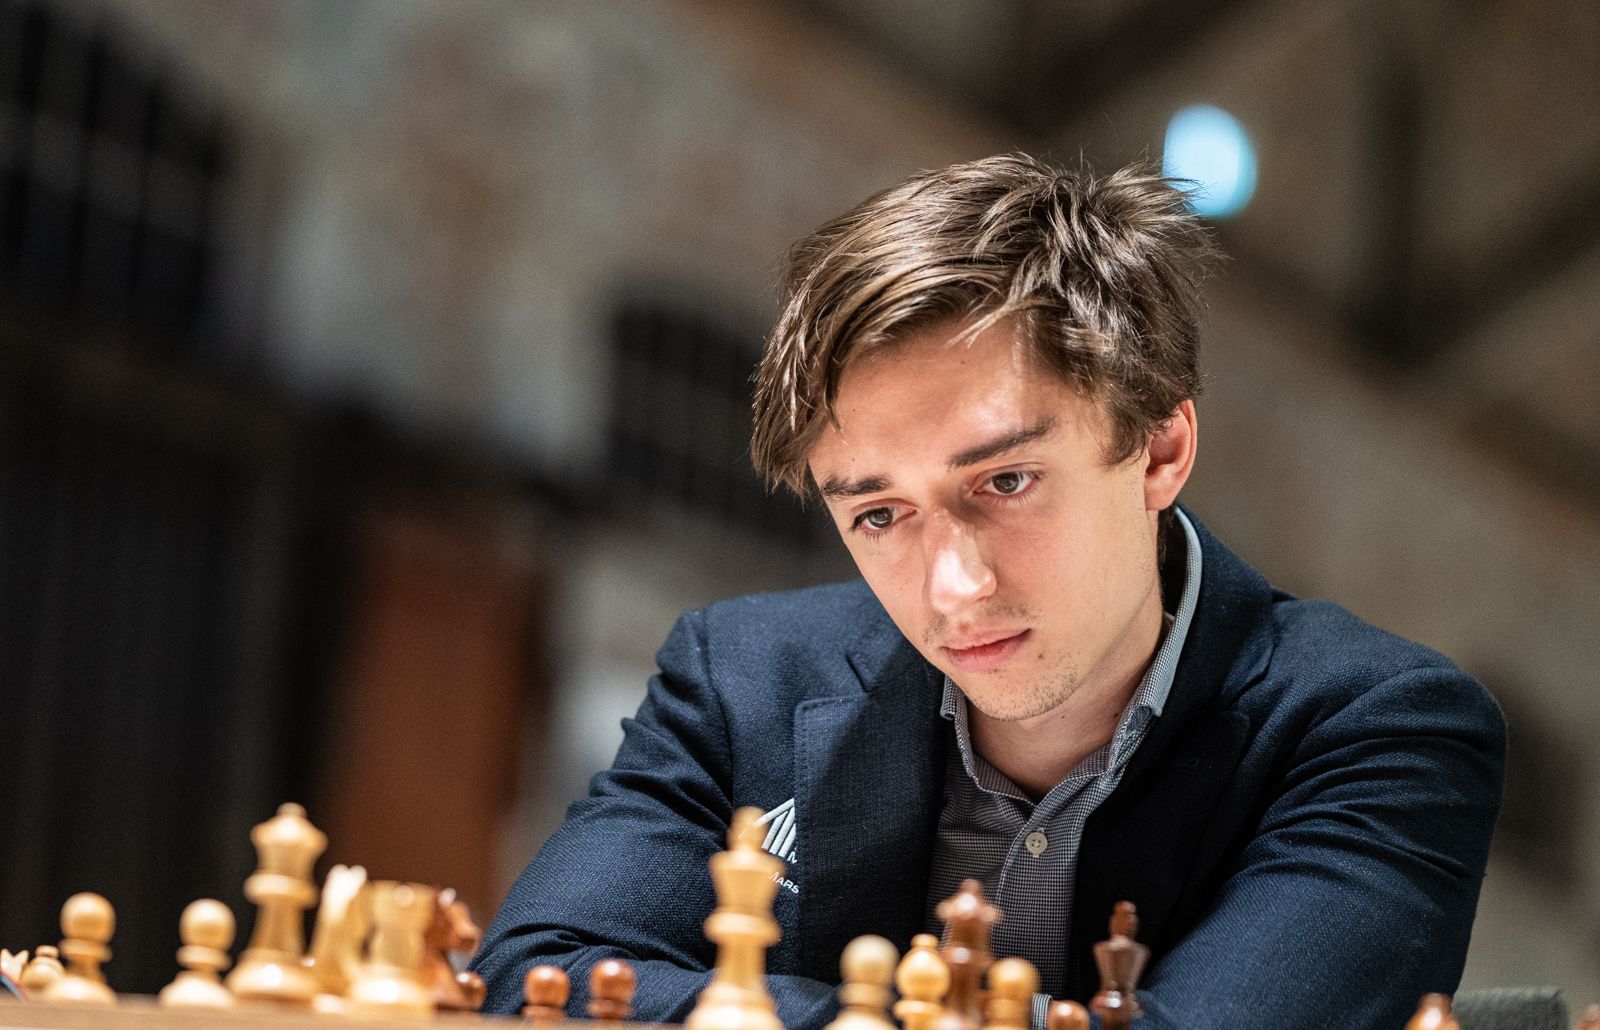 I have fired my seconds many times— Daniil Dubov after R4 of the